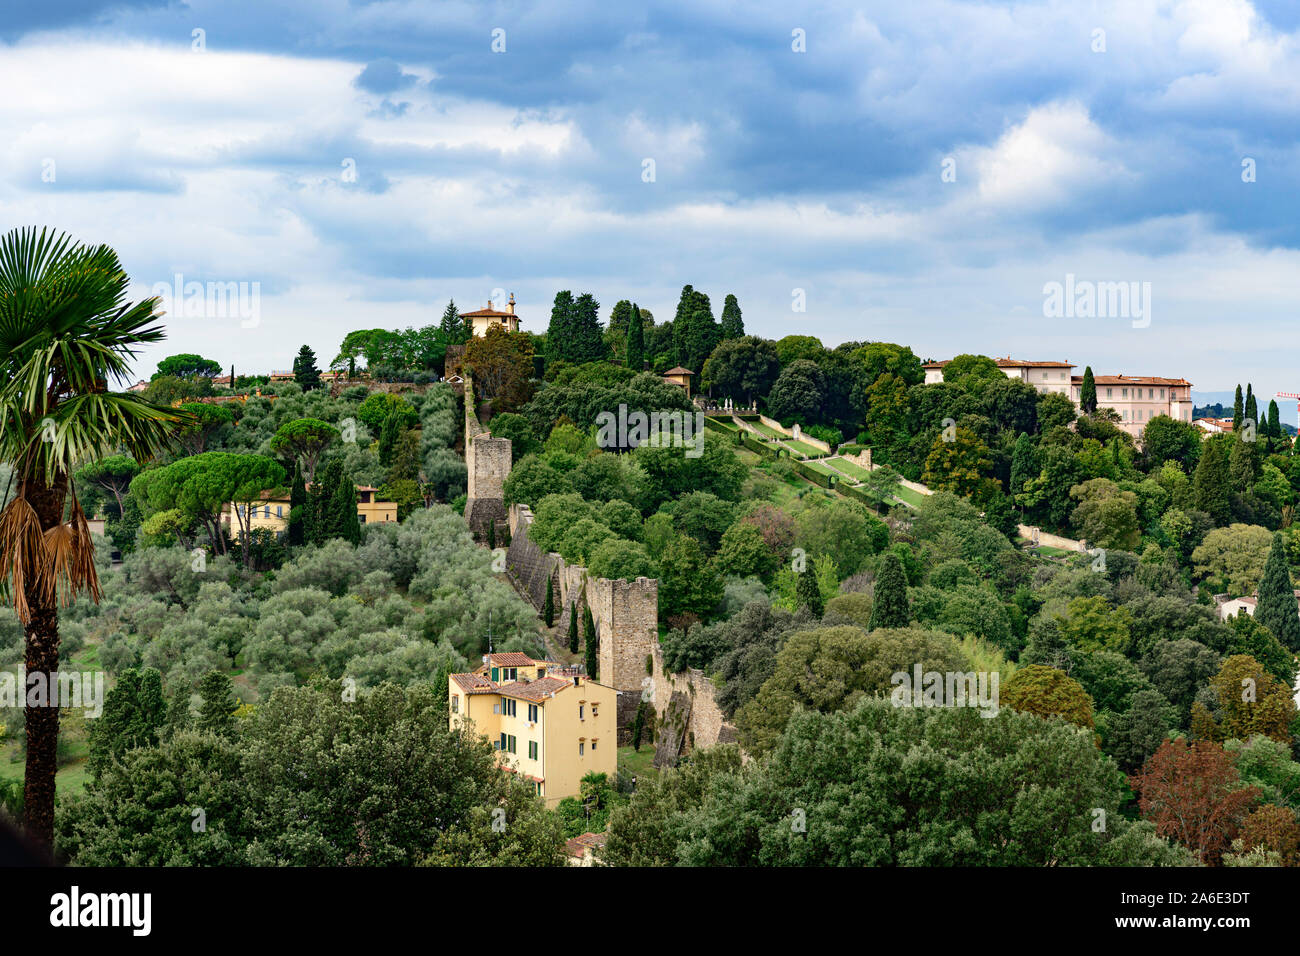 View of the city walls and Boboli Gardens on the hill, Florence Tuscany Italy Stock Photo